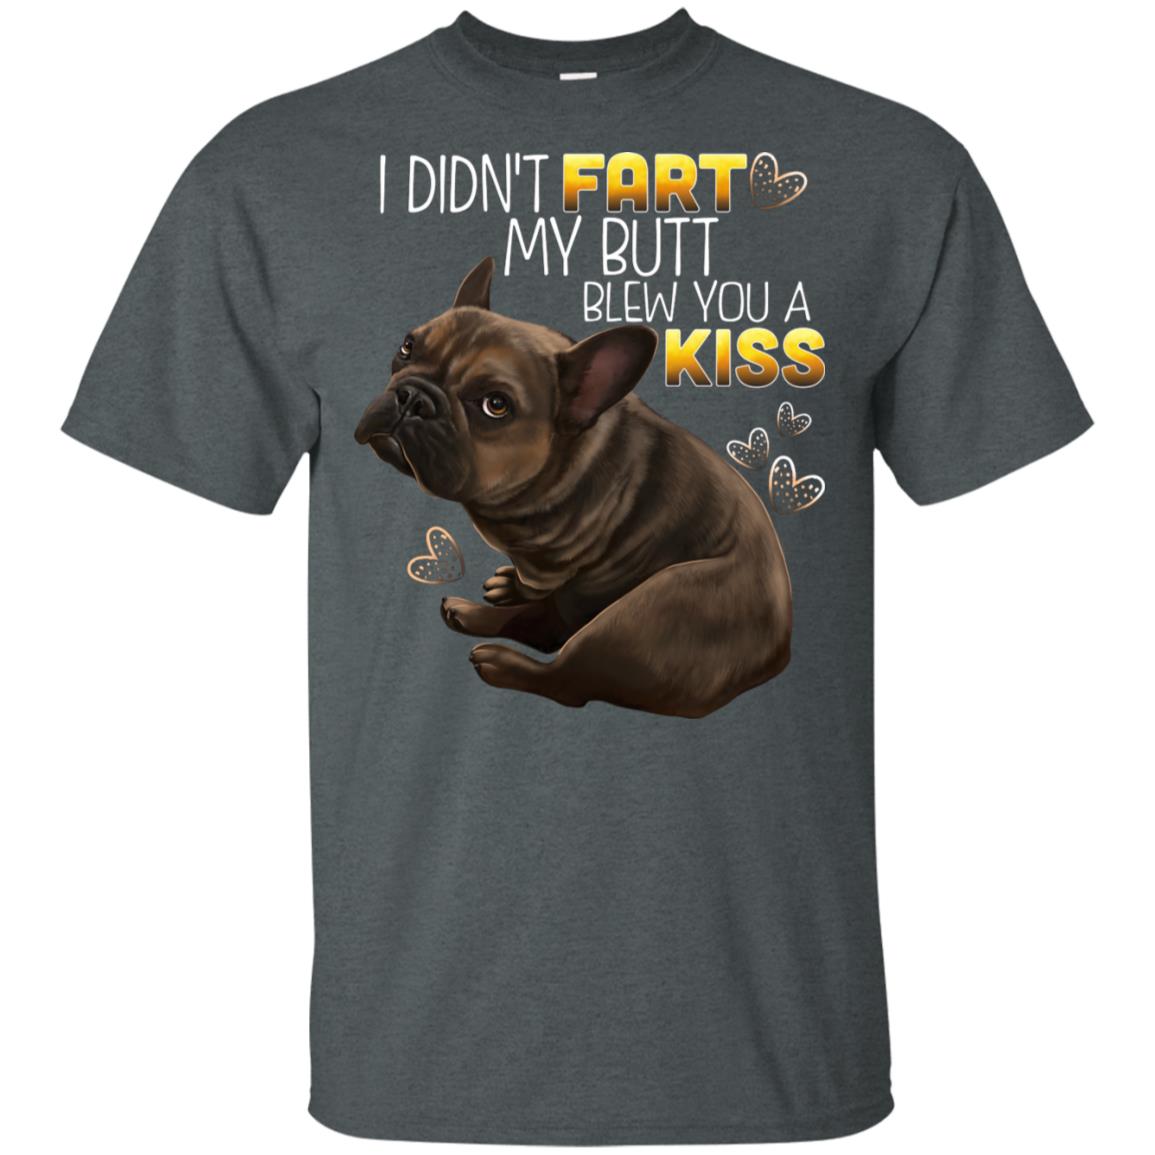 French Bulldog T-Shirt, Brown Frenchie, I Didn't Fart My Butt Blew You A Kiss - GoneBold.gift